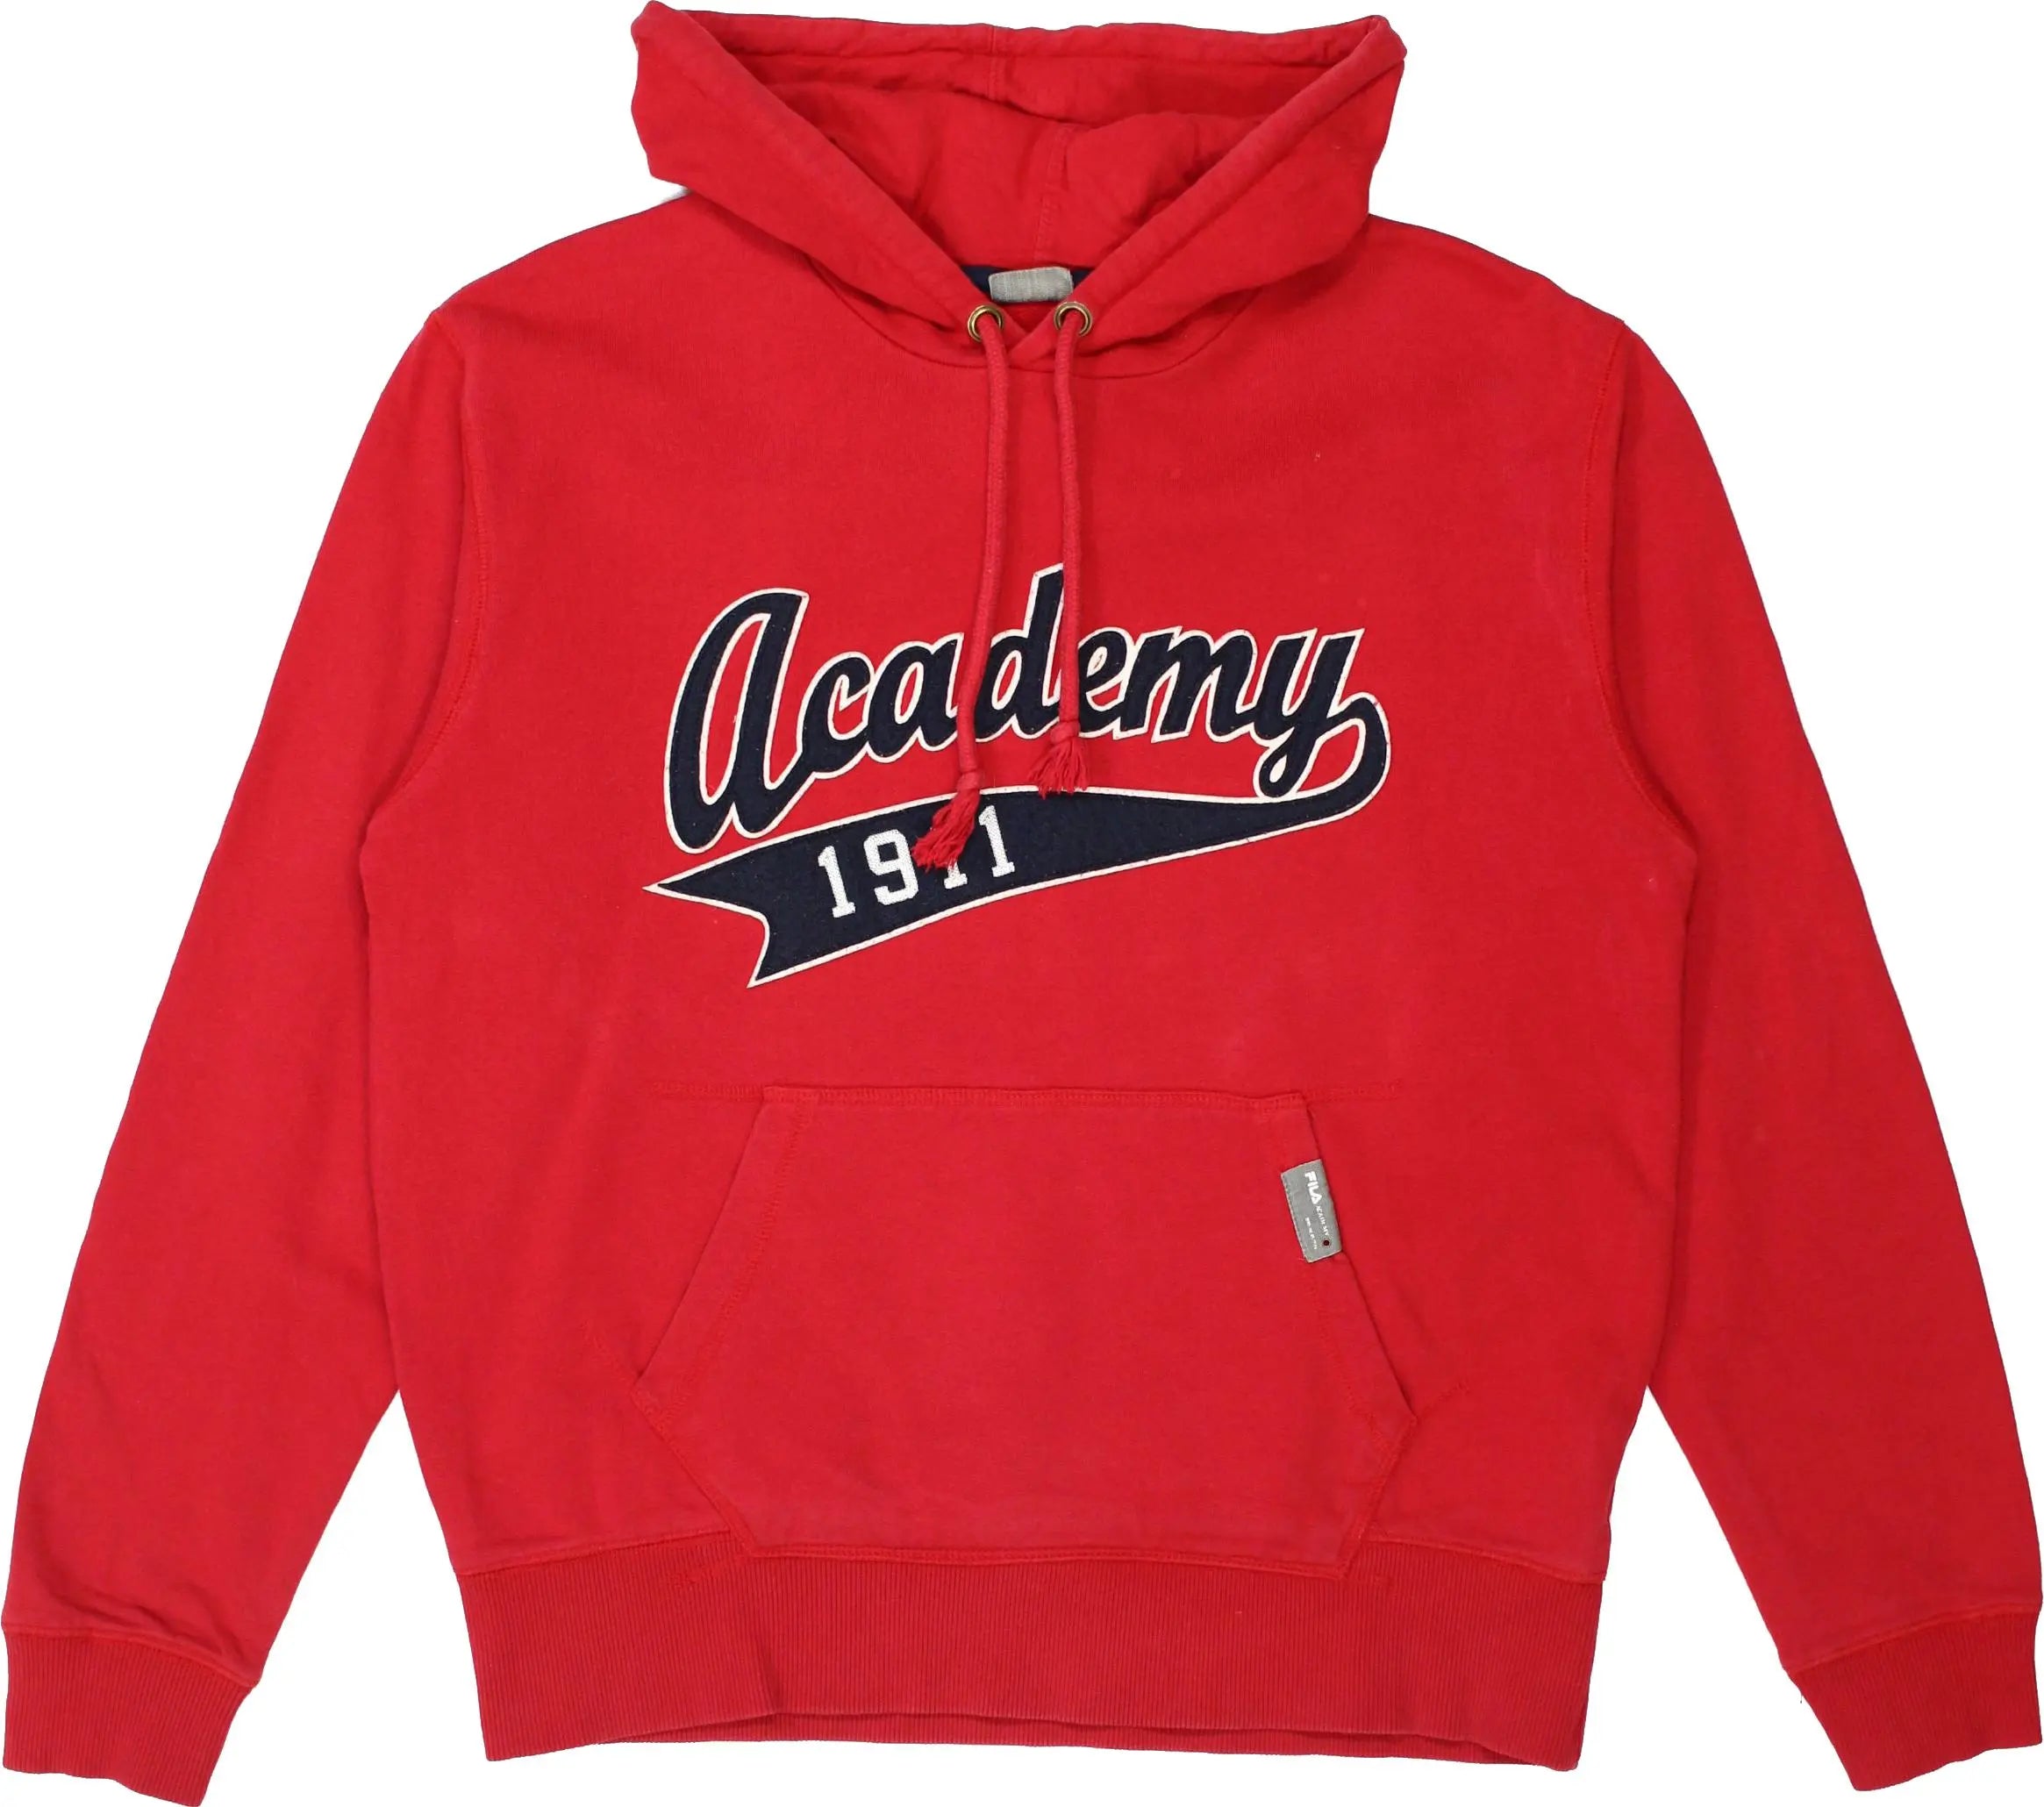 Fila - 'Academy 1911' Hoodie by Fila- ThriftTale.com - Vintage and second handclothing